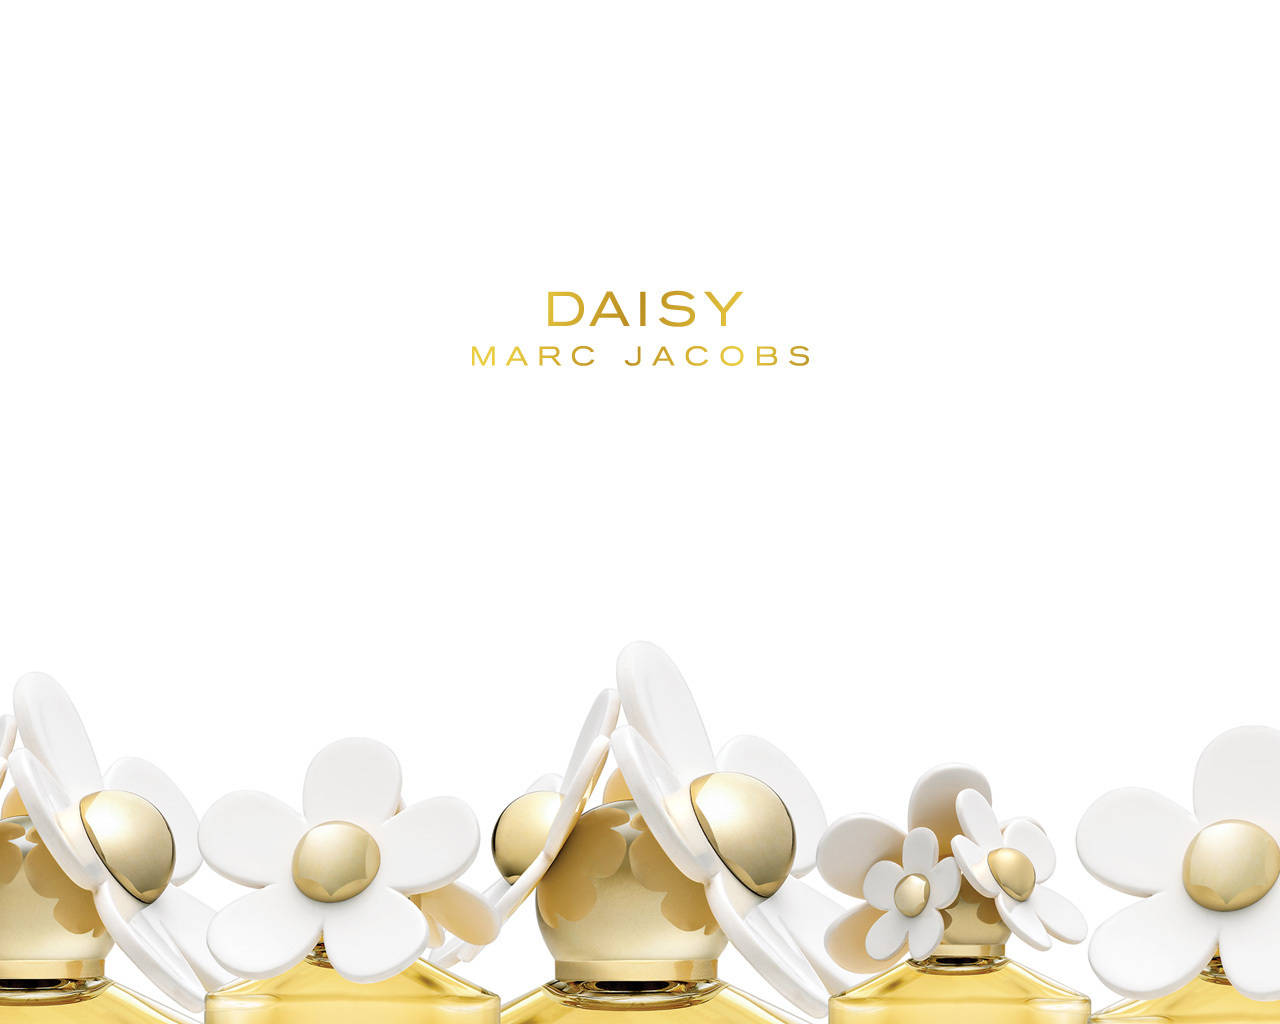 Marc Jacobs White & Gold Daisy Variant